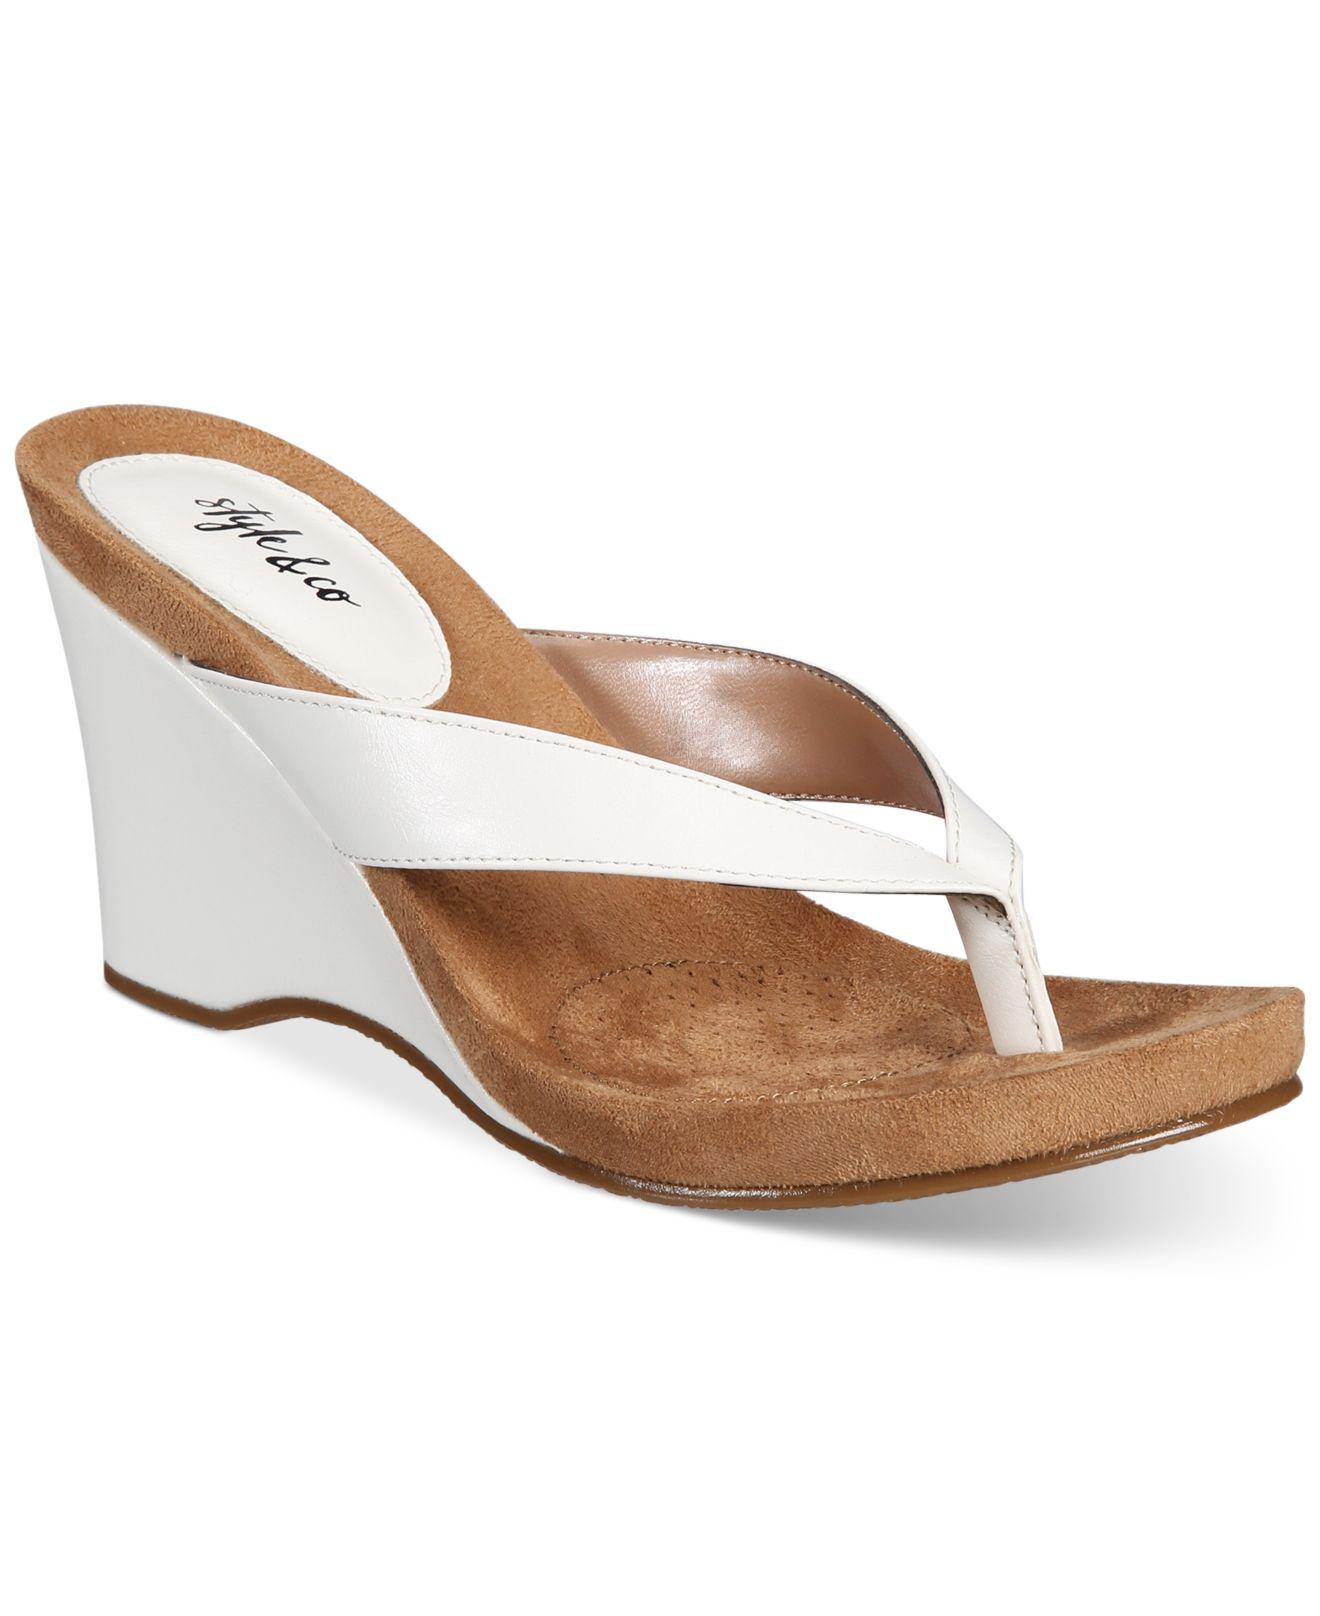 Style & Co. Chicklet Wedge Sandals in White - Lyst